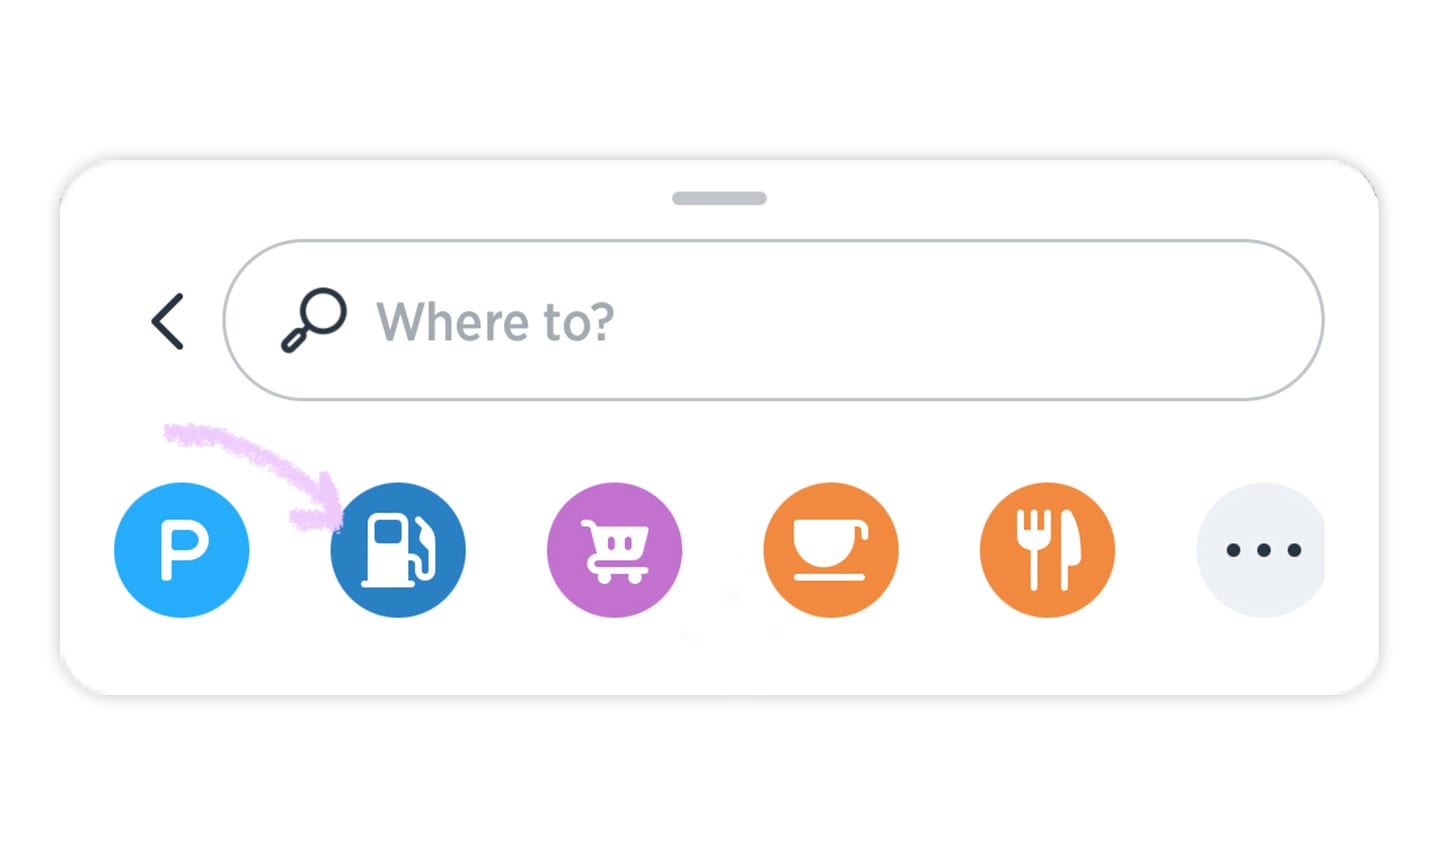 Using AmiGO’s personalization features helps you find the right destination, faster.